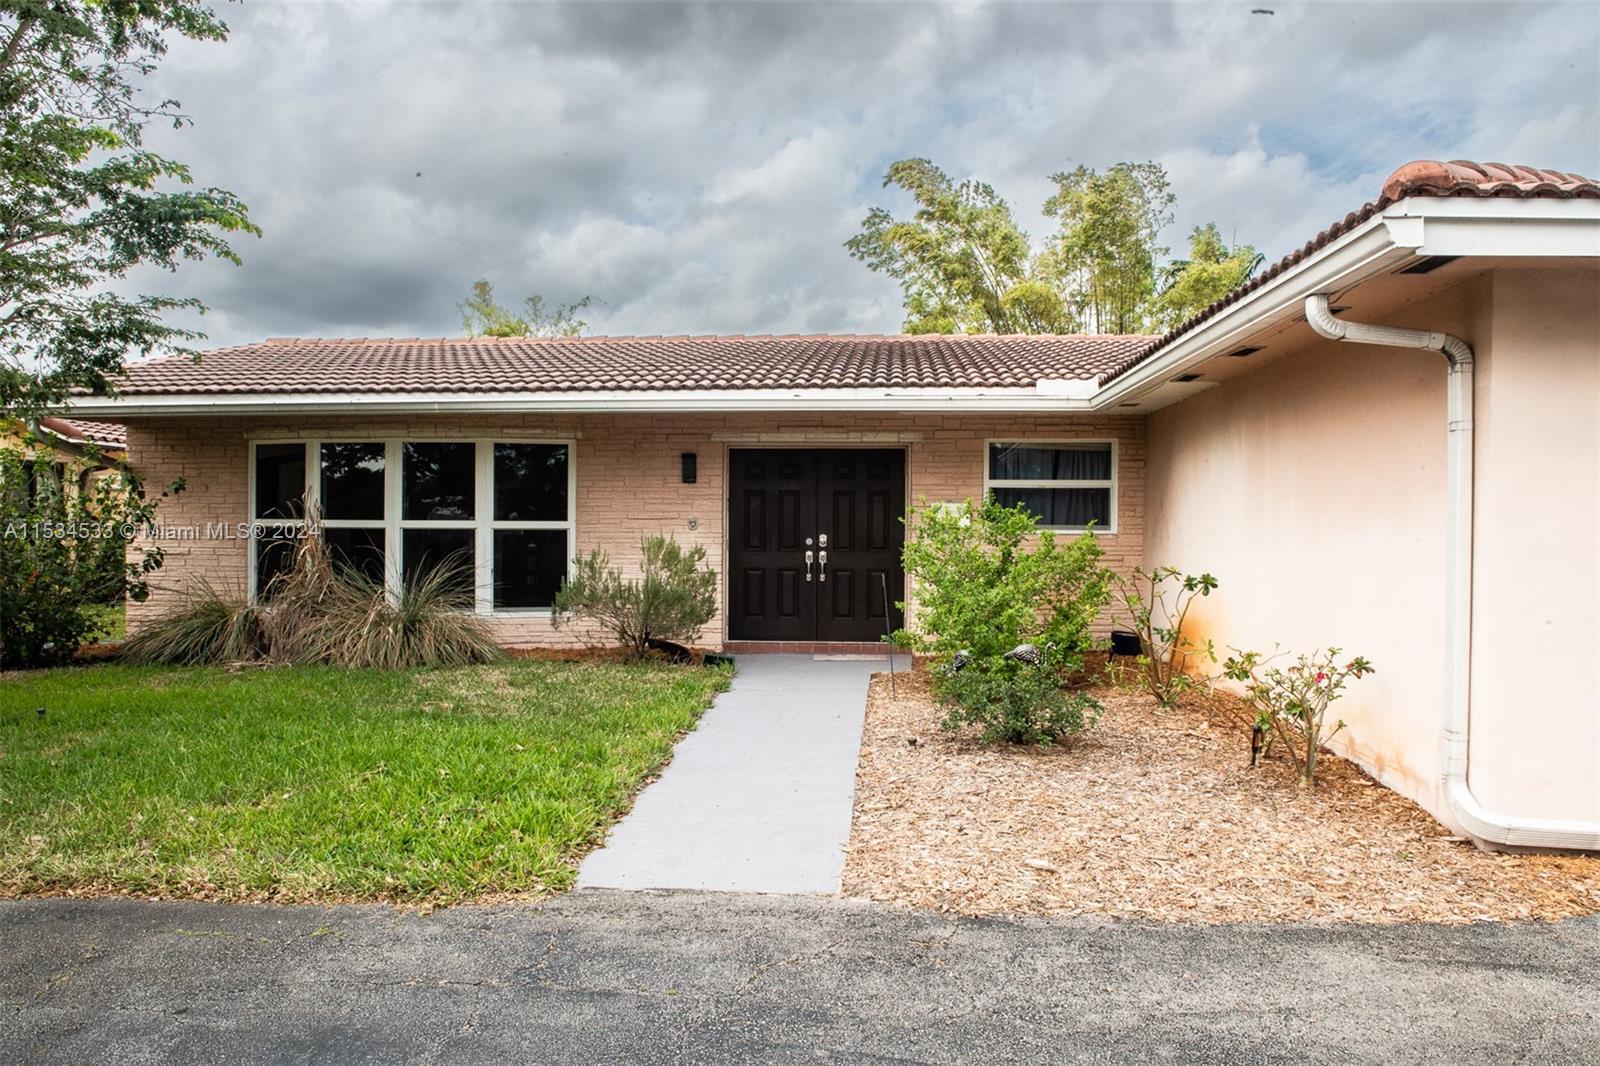 Photo of 5317 Mckinley St in Hollywood, FL